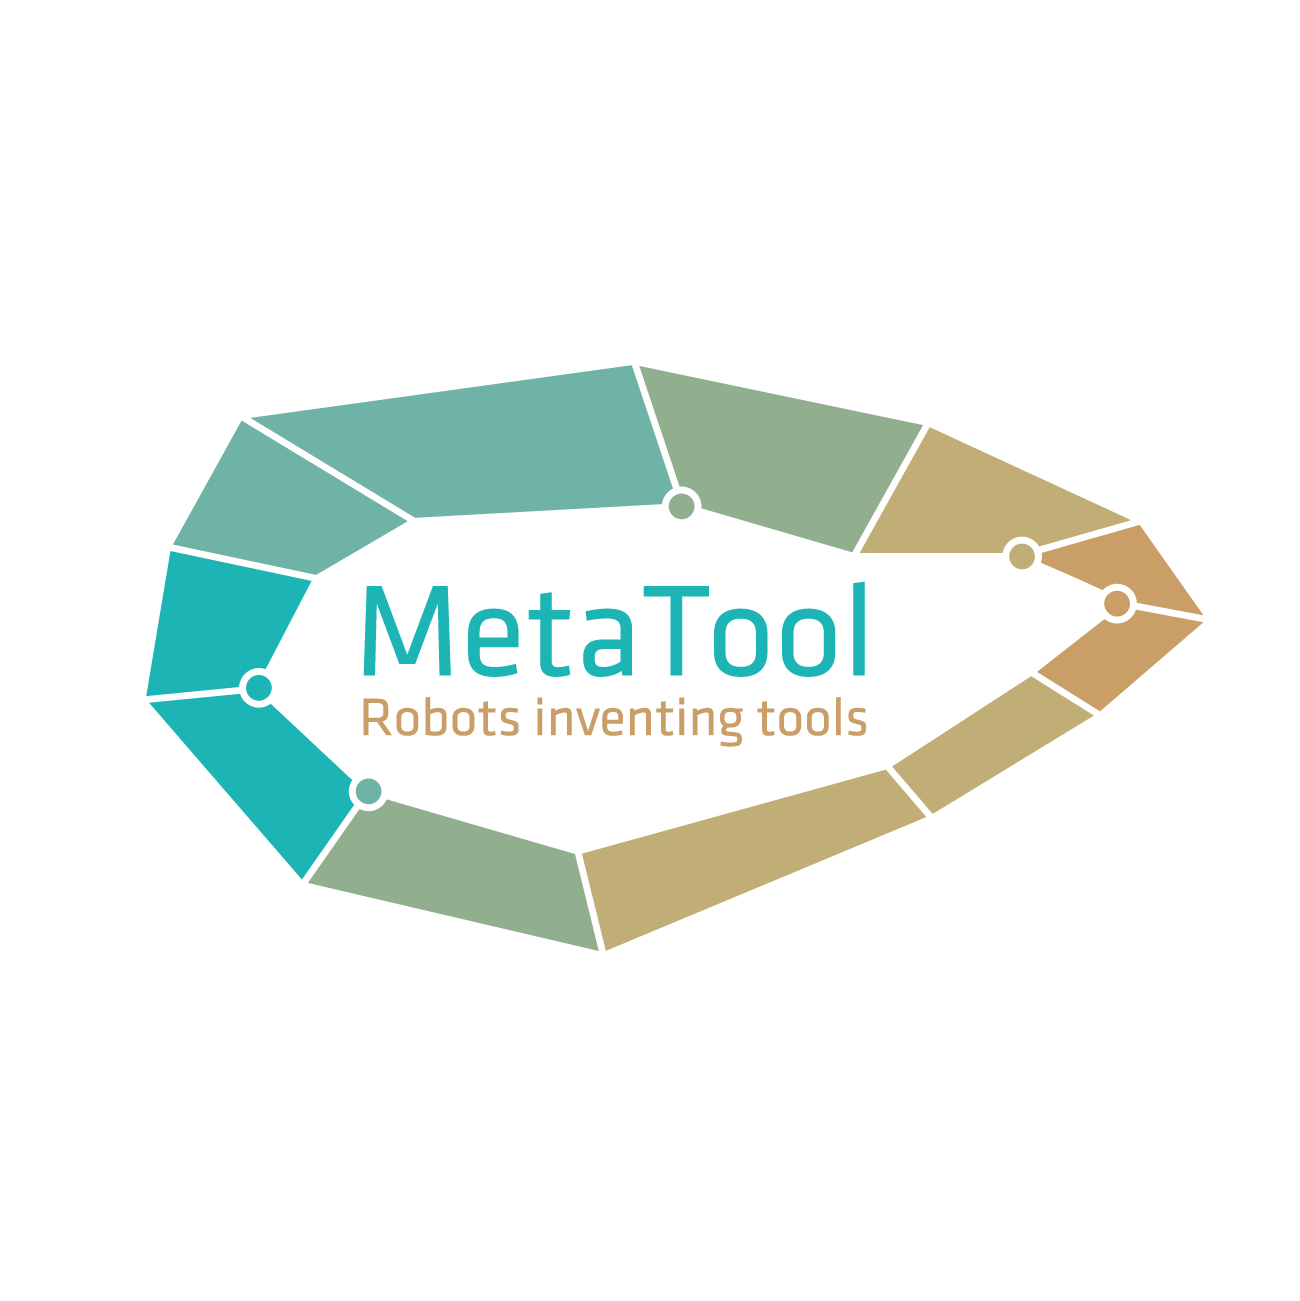 Logo of Project METATOOL that aims to provide a computational model of synthetic awareness to enhance adaptation and achieve tool invention